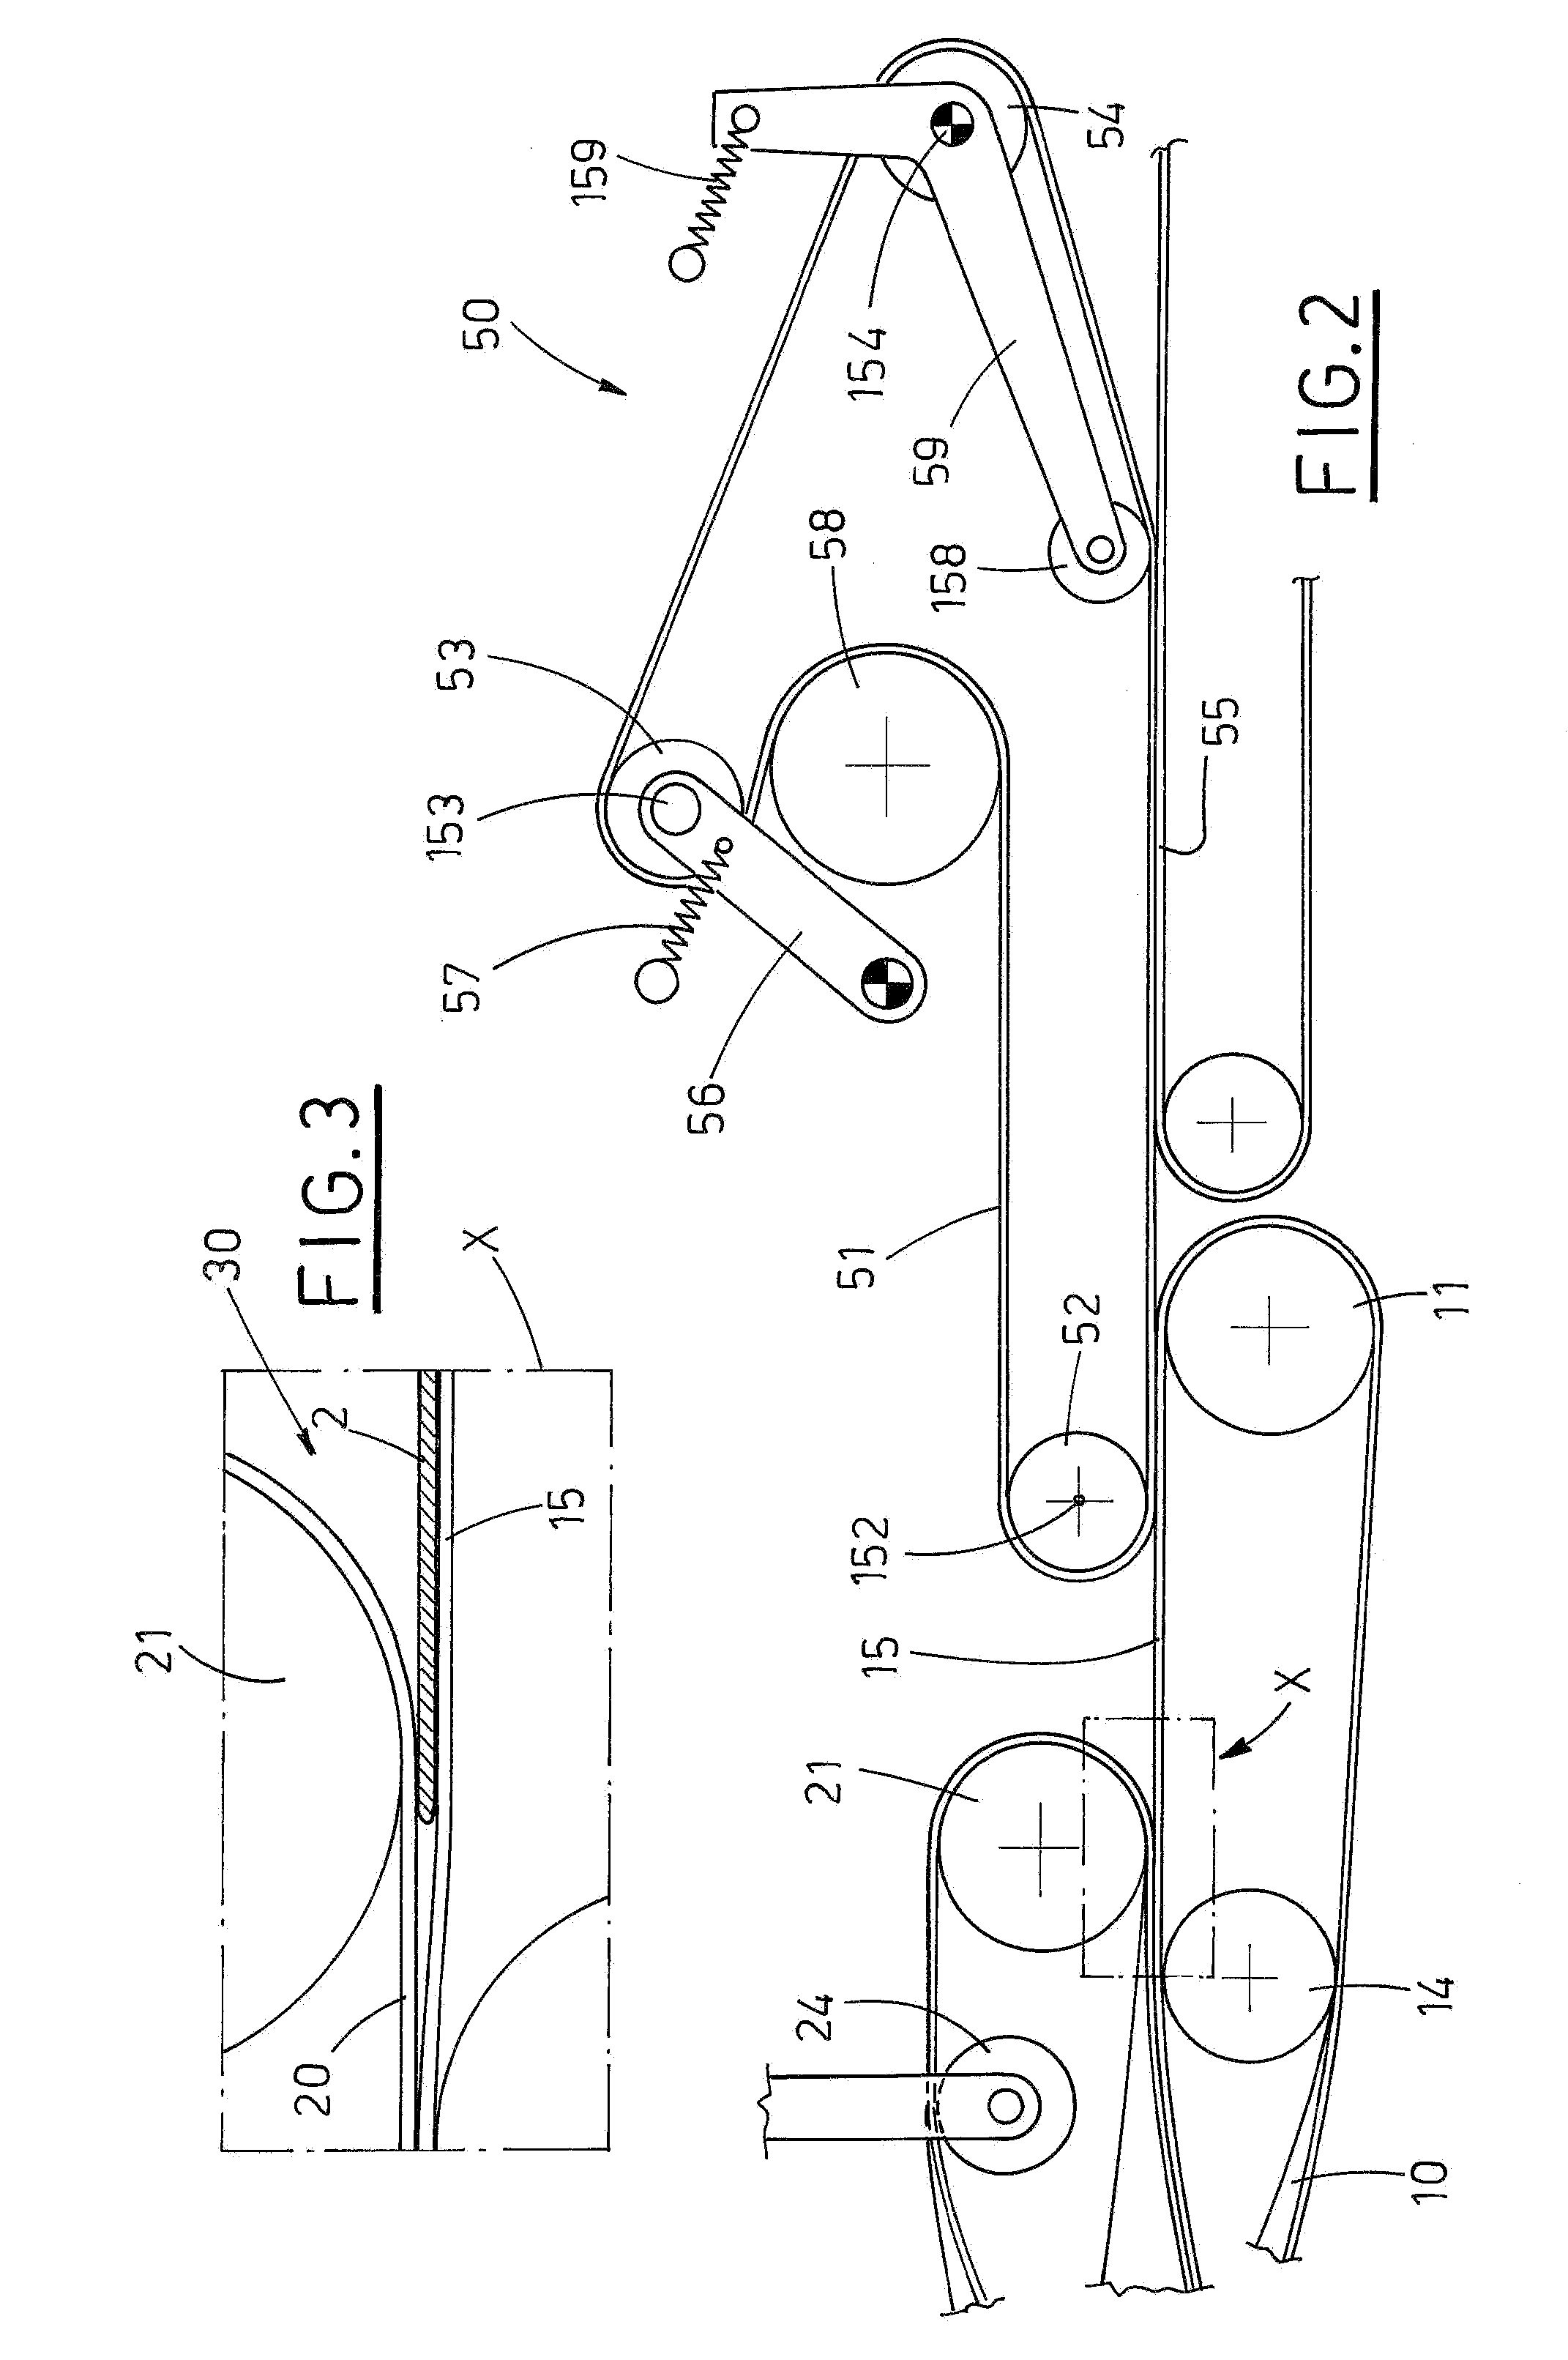 Conveyor for transporting and overturning flat objects, such as sheaves of paper or printed materials